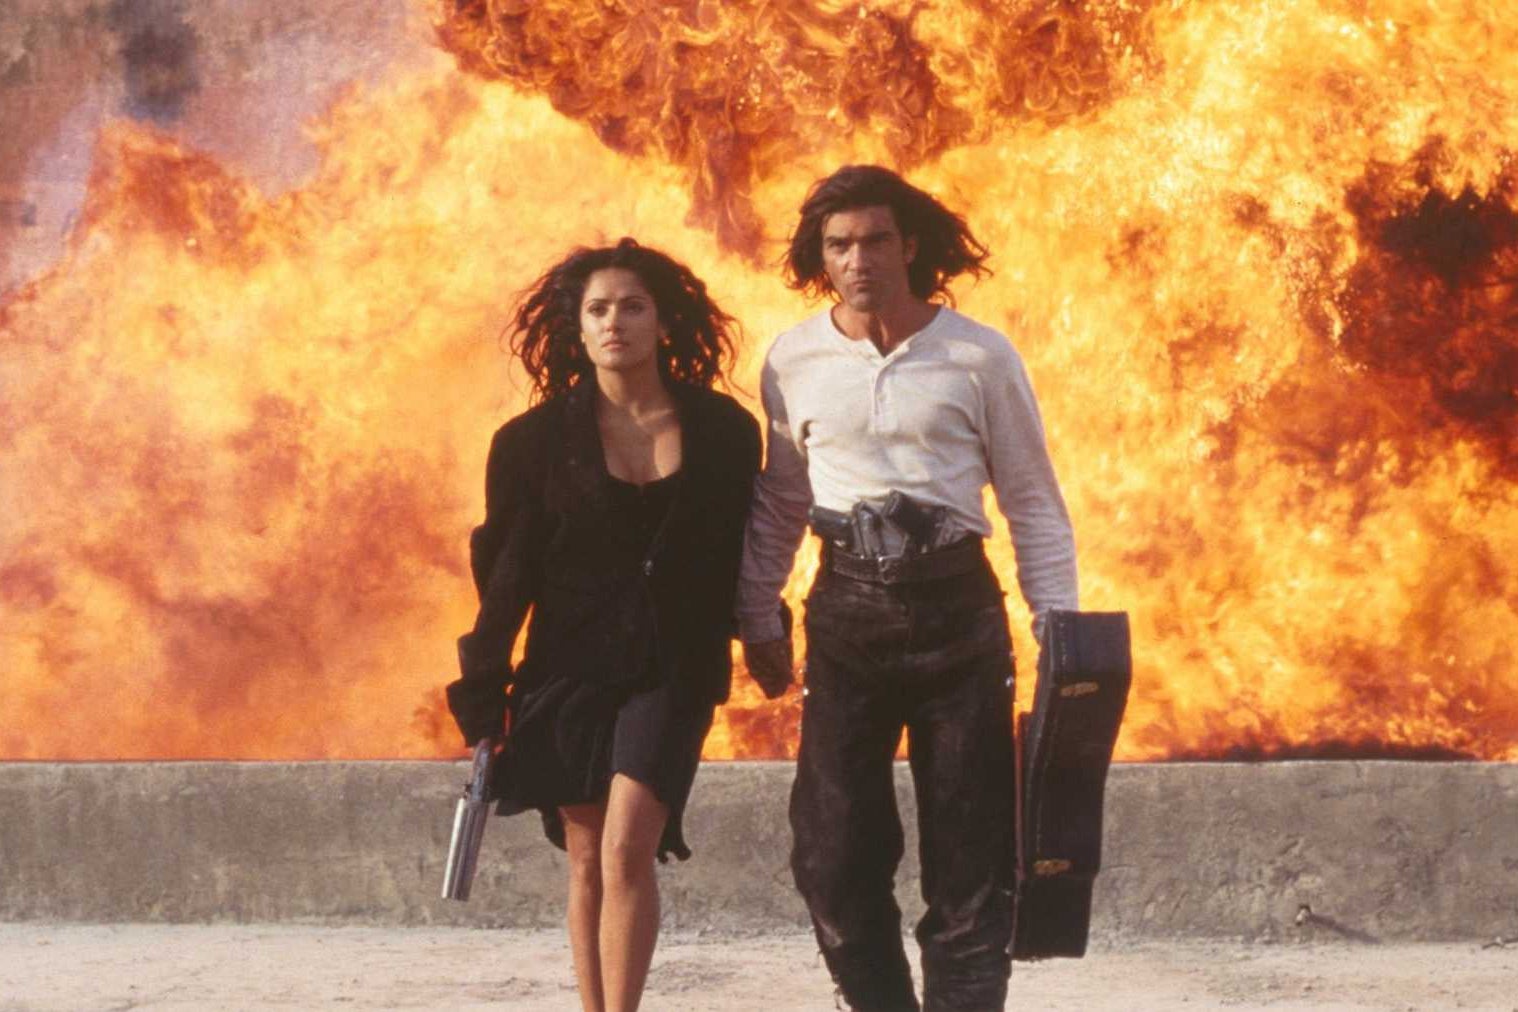 Salma Hayek (left) and Antonio Banderas (right) hold hands and a gun and guitar case (respectively) as they walk away straight faced as an explosion unfolds behind them.